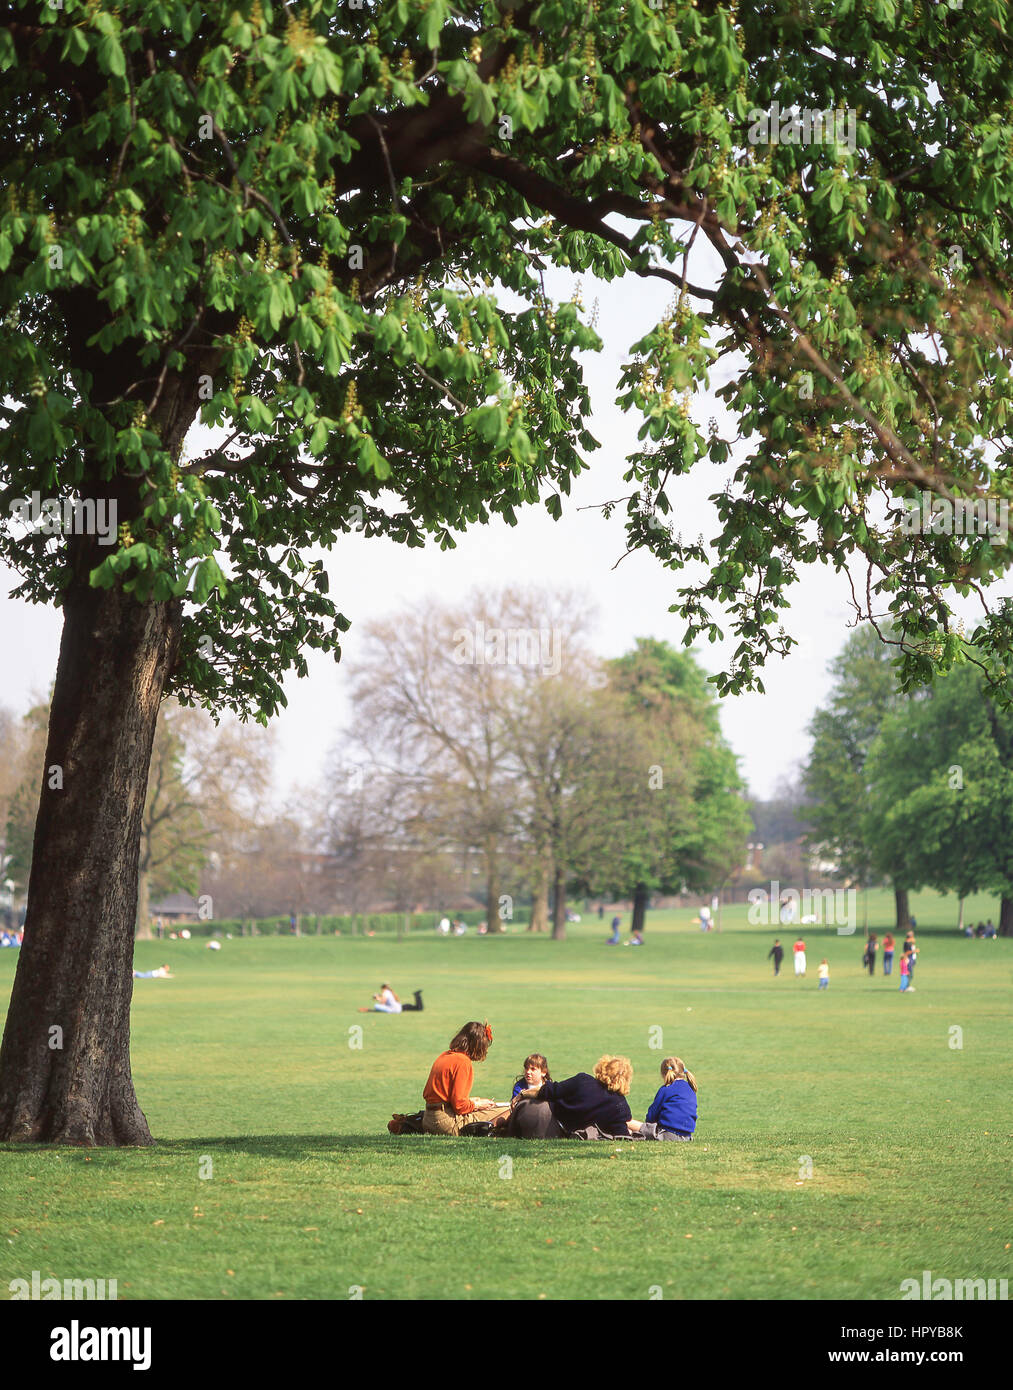 Le Parc de Greenwich, Greenwich, London Borough of Greenwich, Greater London, Angleterre, Royaume-Uni Banque D'Images